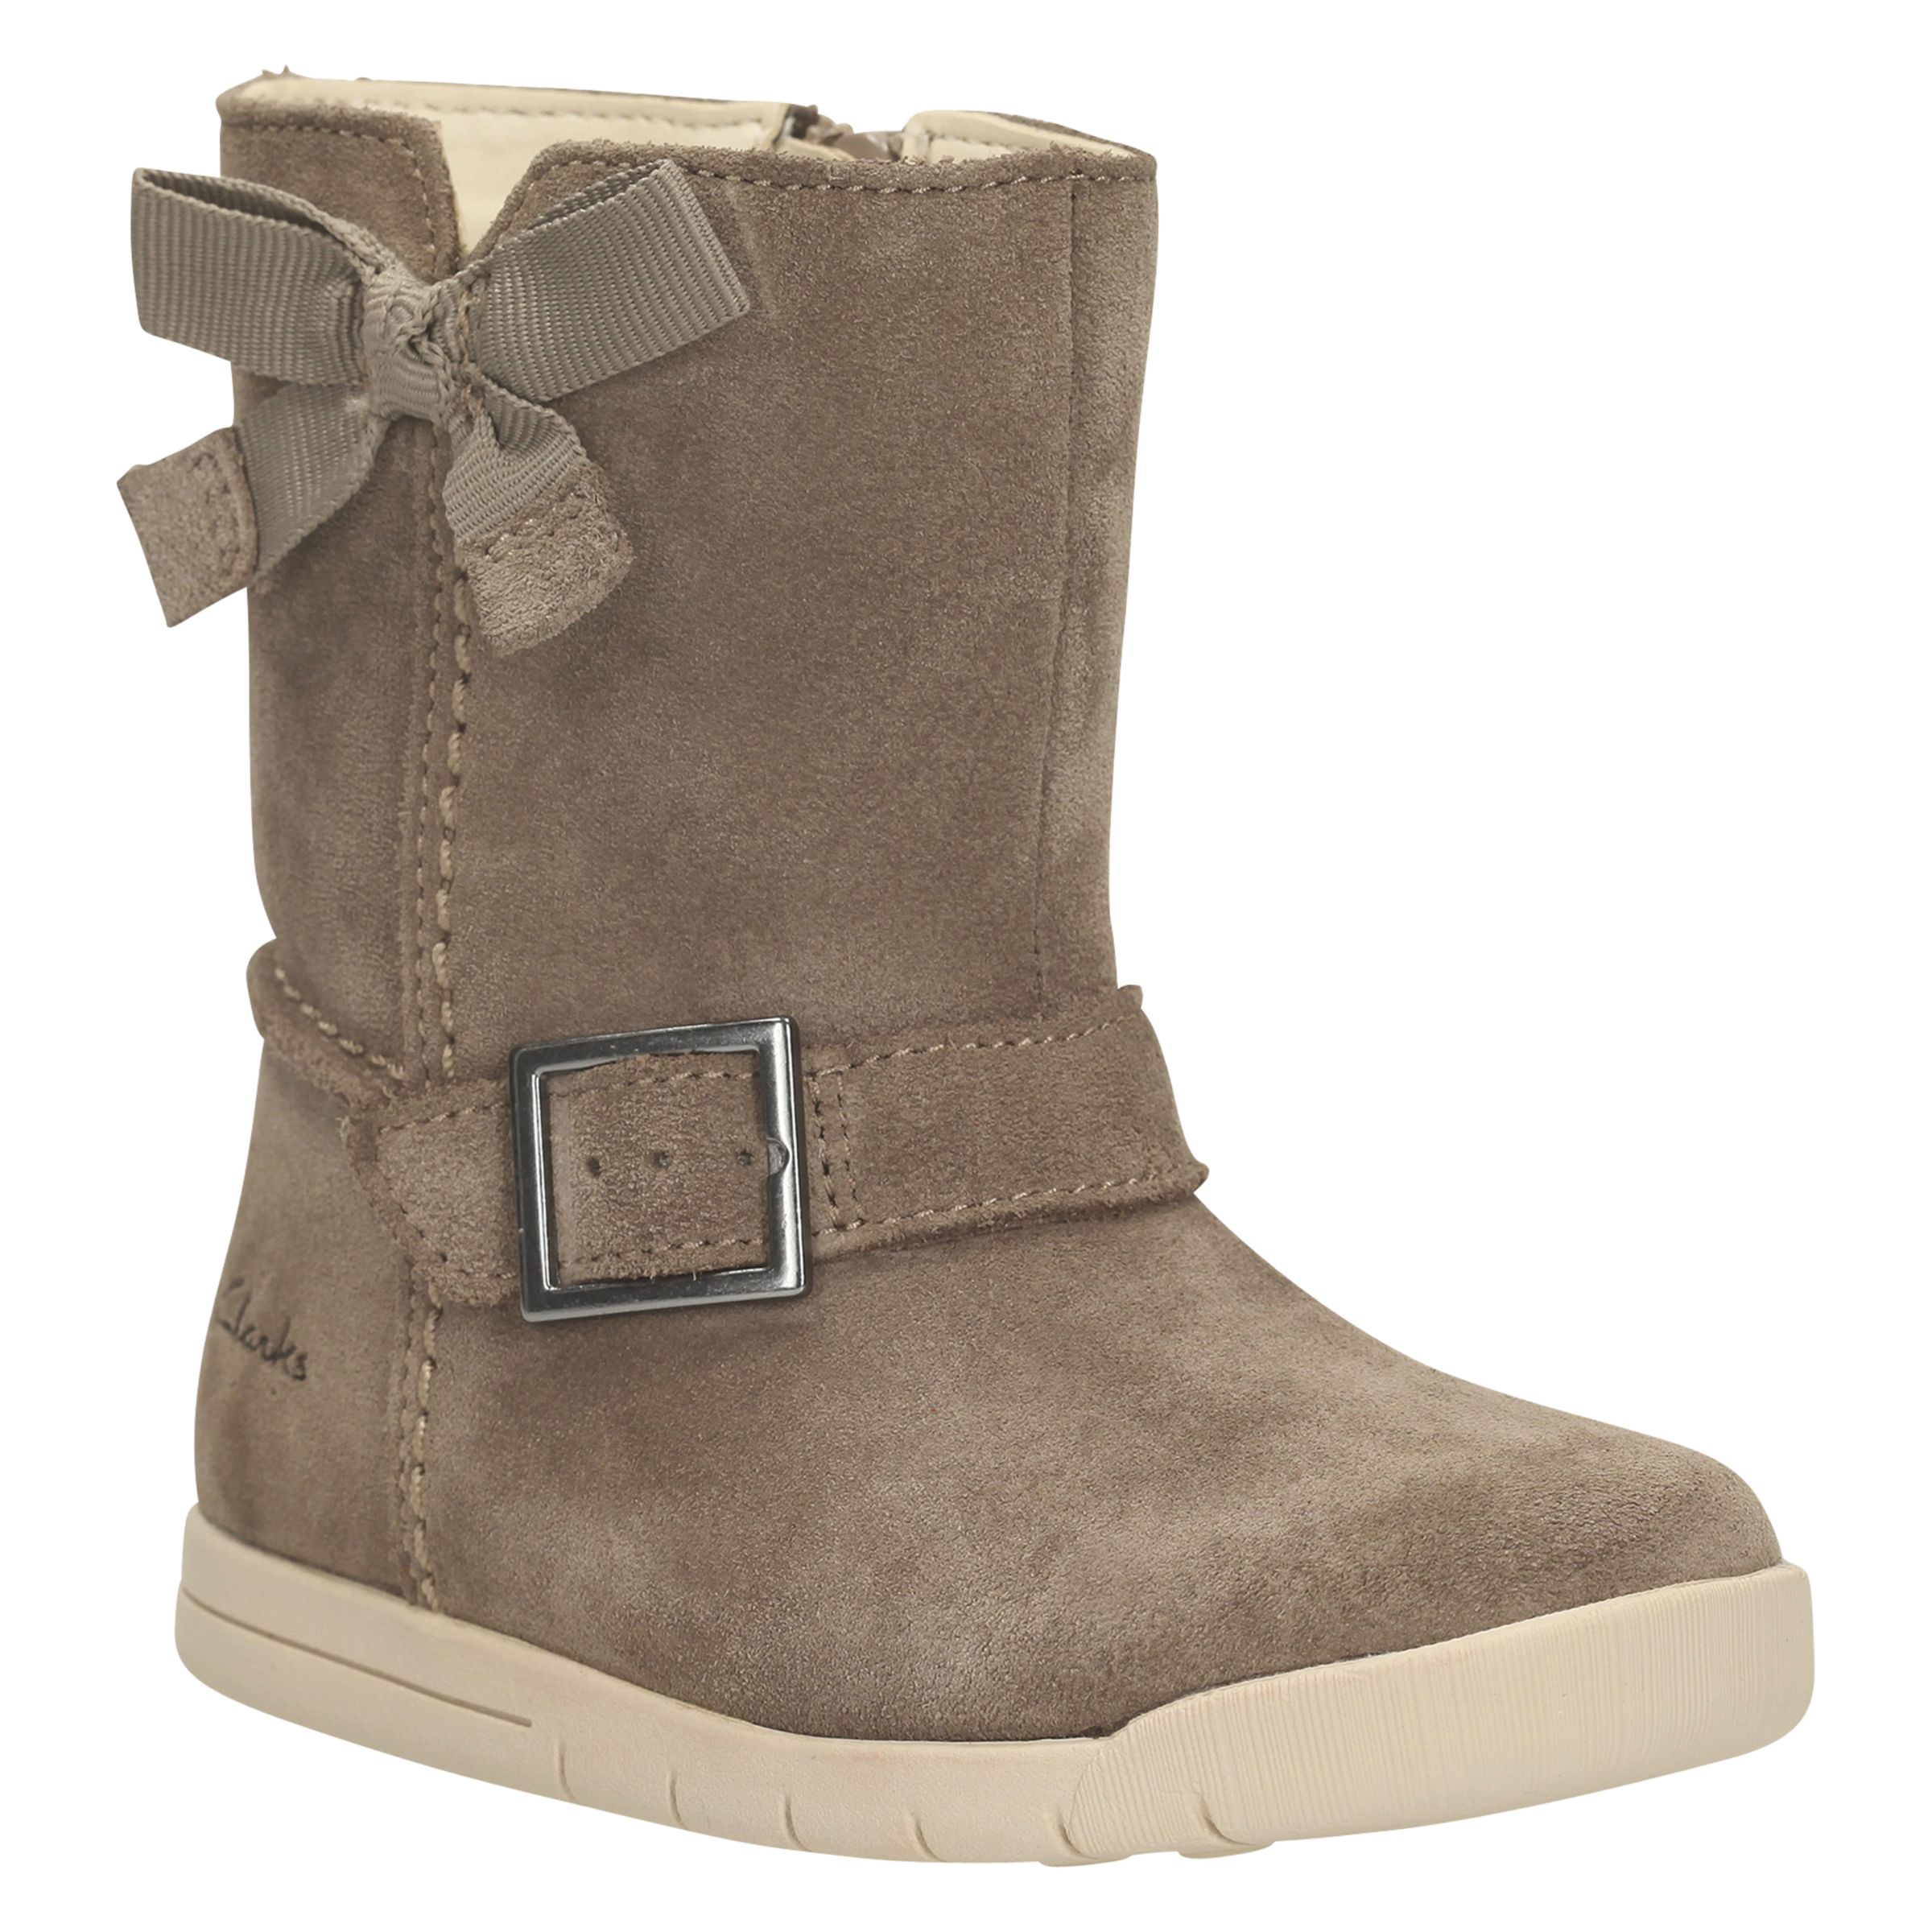 clarks boots toddler